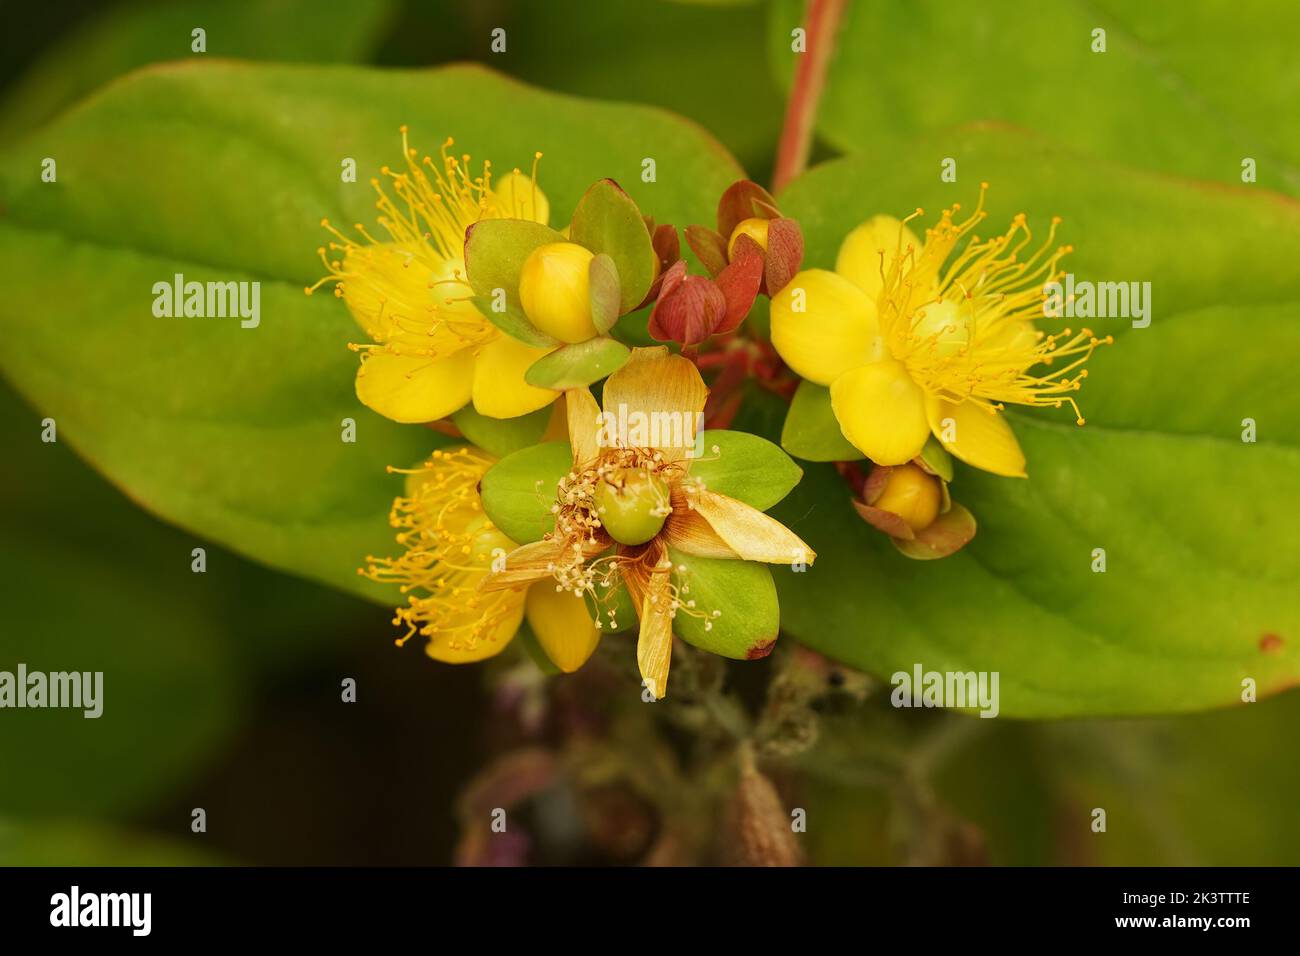 Colorful closeup on a yellow flowering Tutsan shrub , Hypericum androsaemum in the garden with berries Stock Photo